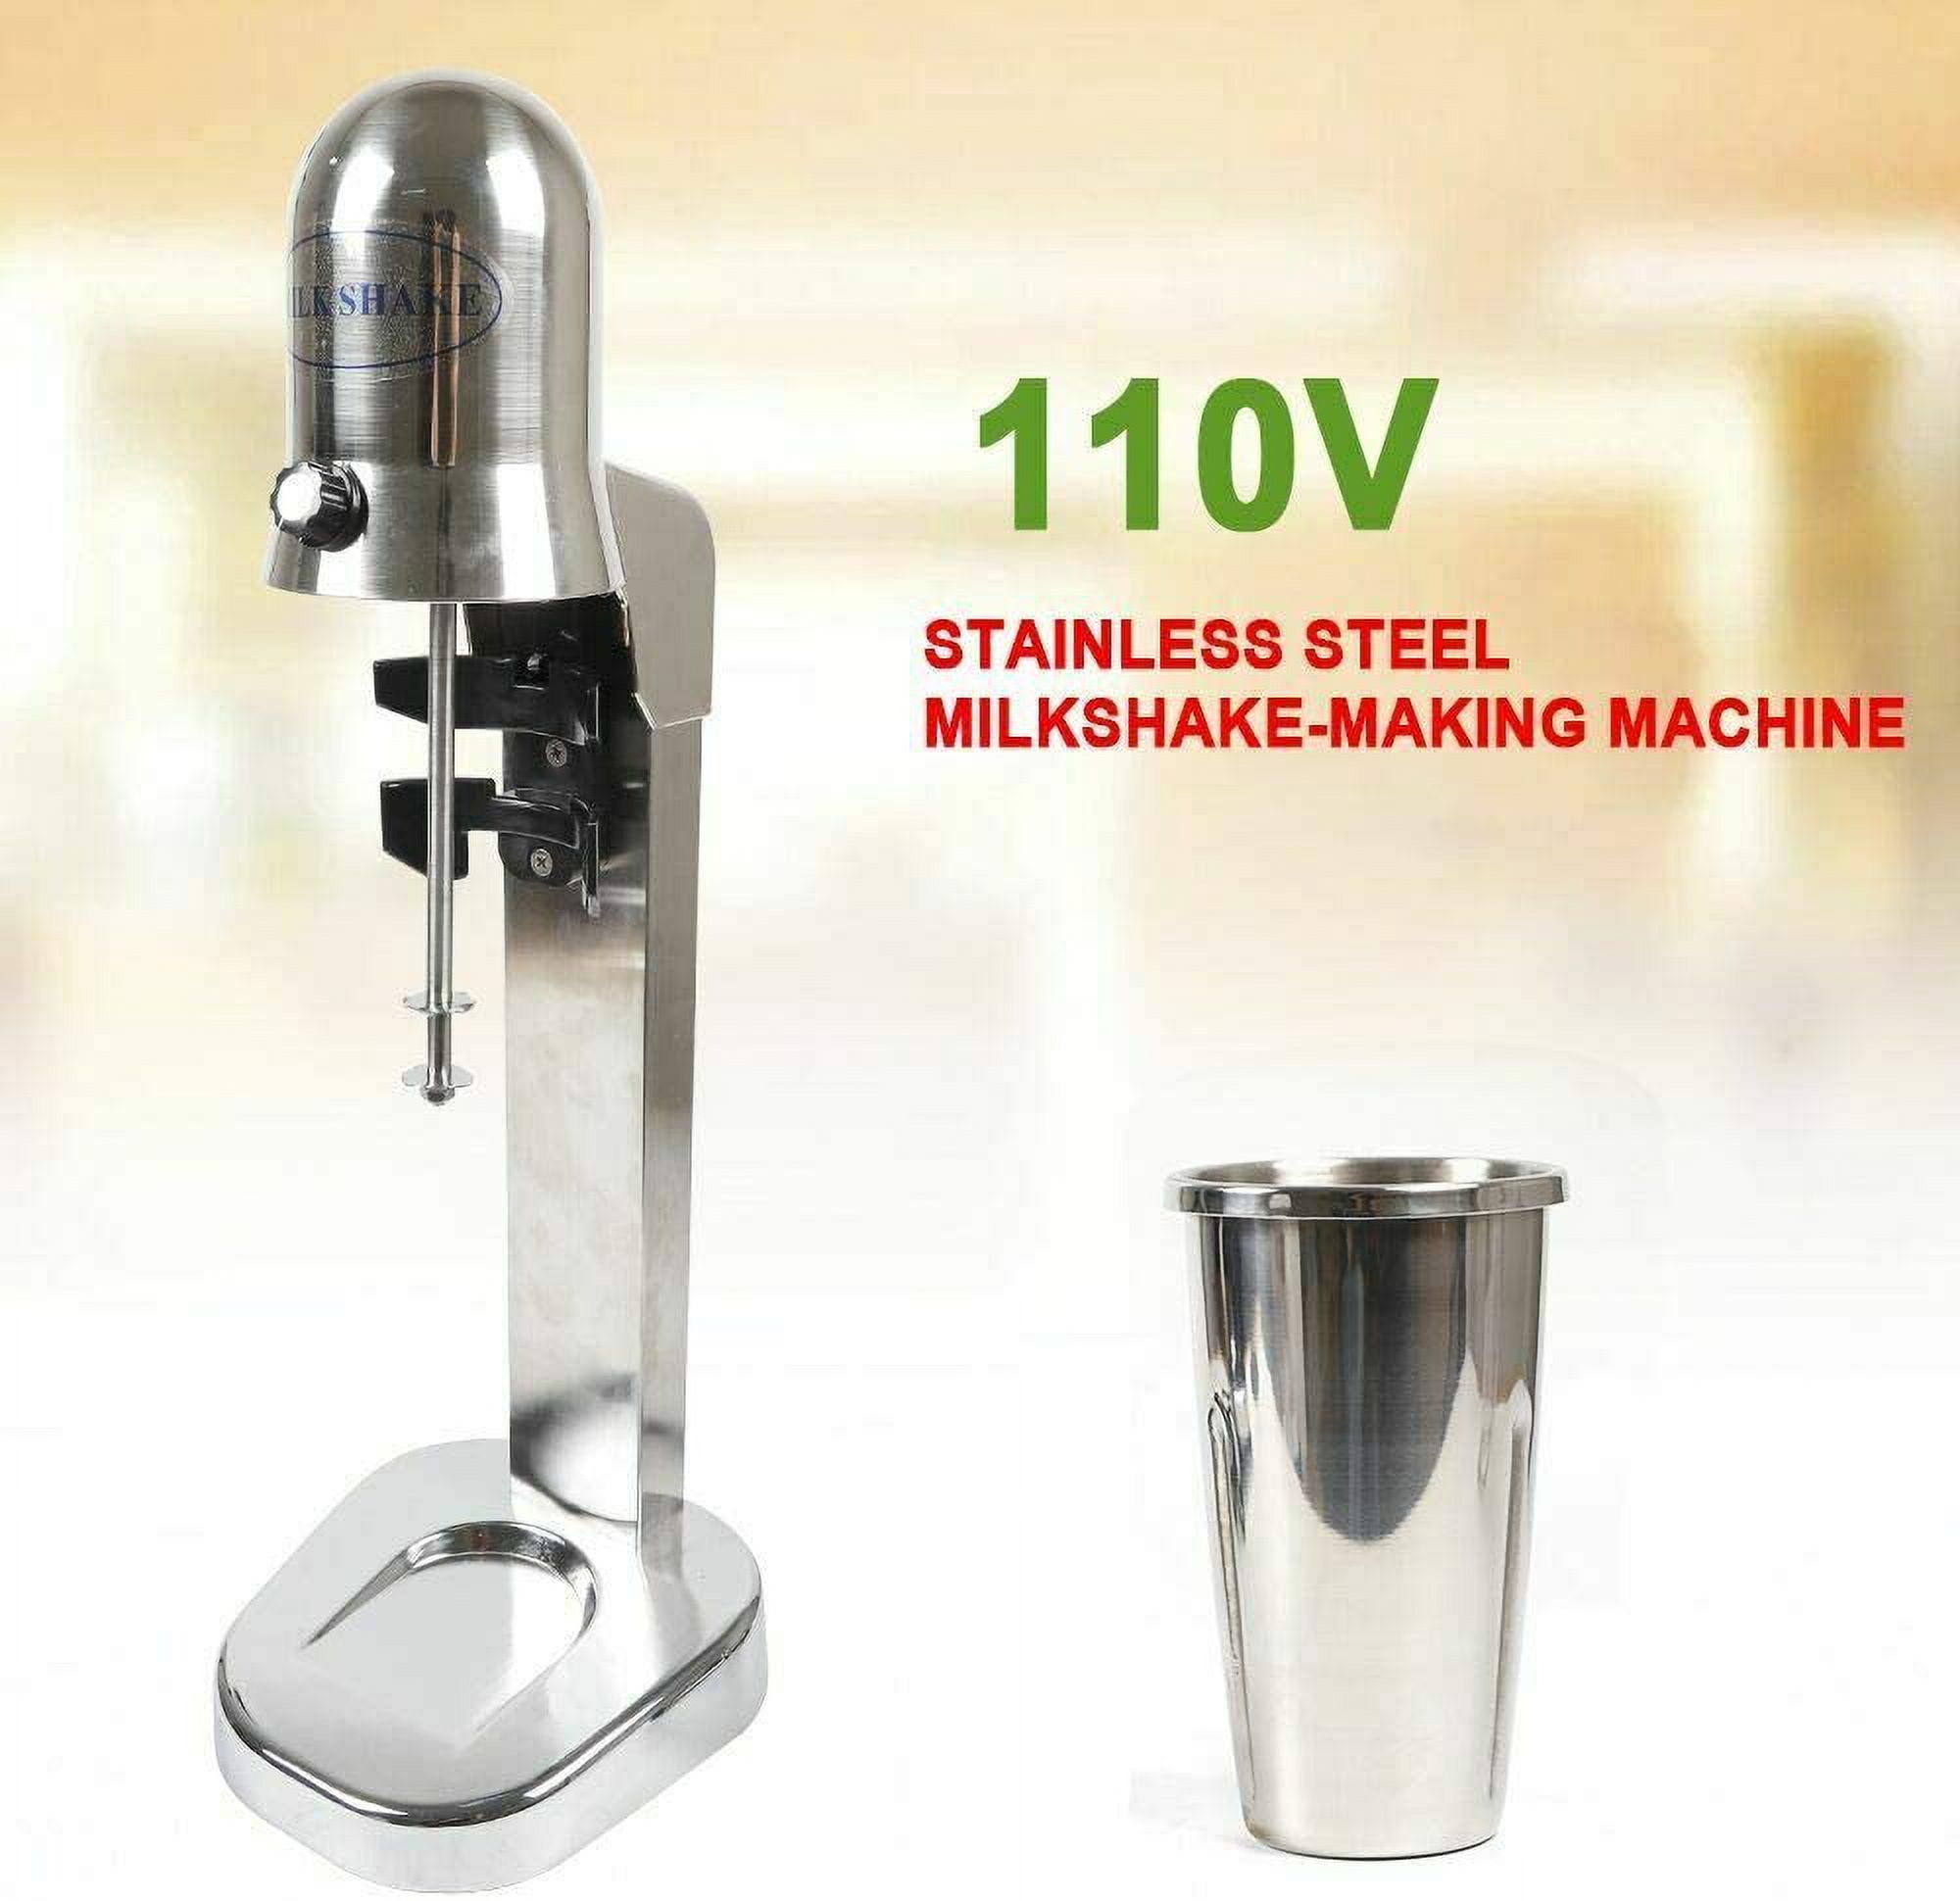 Electric Milk Shaker 110V 60HZ 280W 18000RMP Commercial Stainless Steel Drink Mixer Machine Smoothie Malt Blender 4.5KG with 2 Speed Adjustable for Home Shop (Round Head) - image 4 of 8